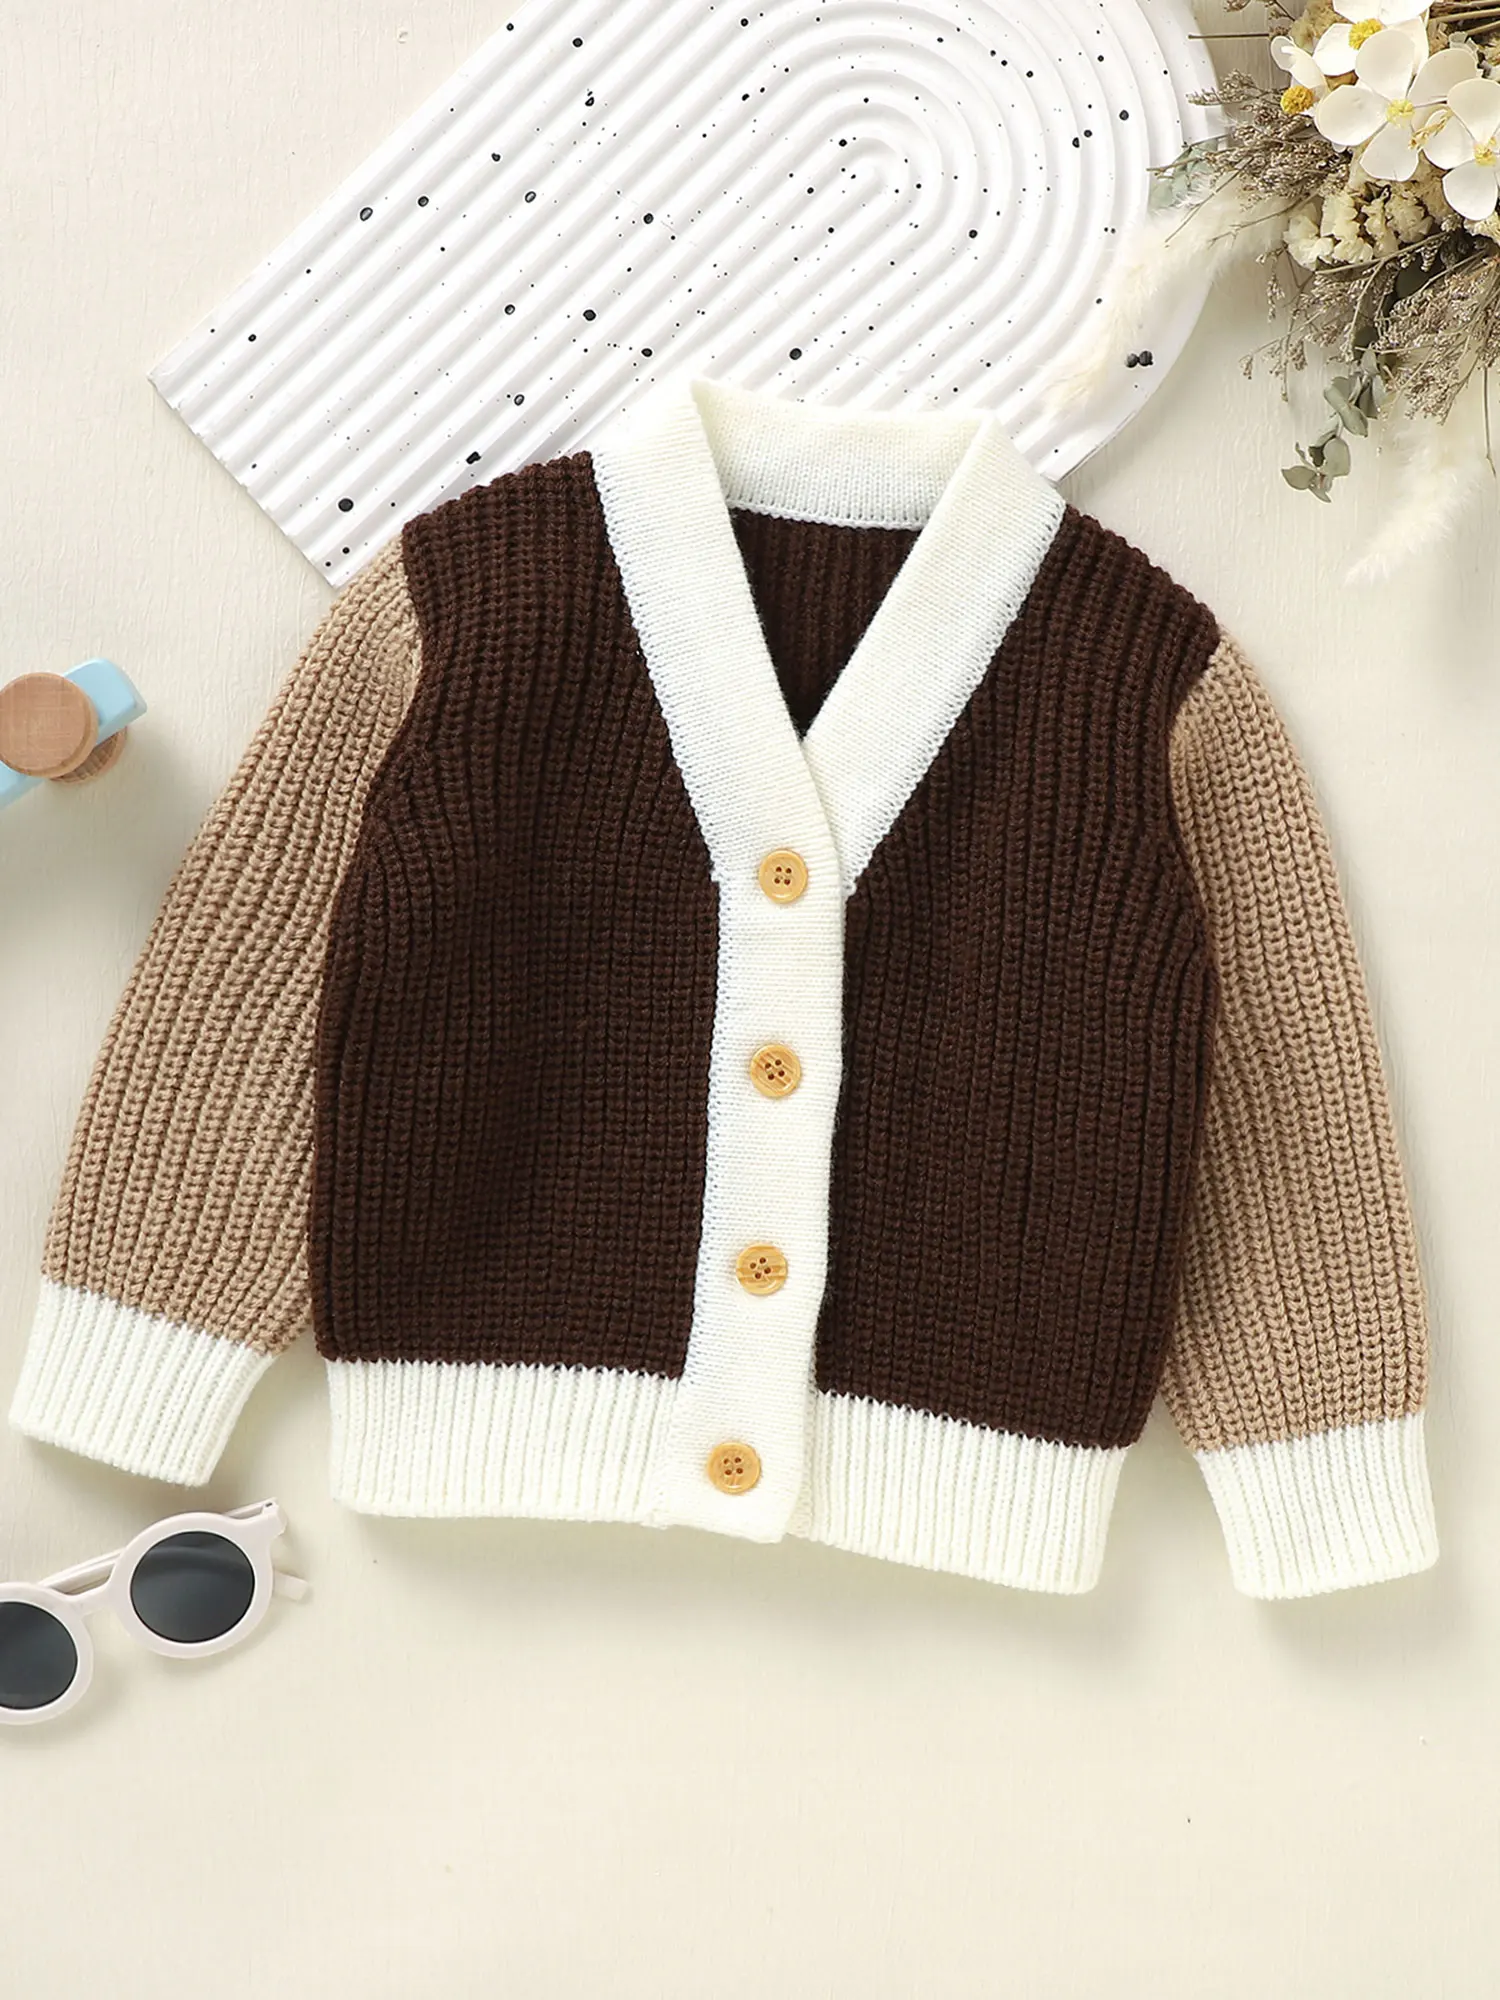 

Cute and Cozy Infant Hooded Knit Sweater with Adorable Animal Ears - Warm Button-Up Cardigan for Baby s Autumn Wardrobe